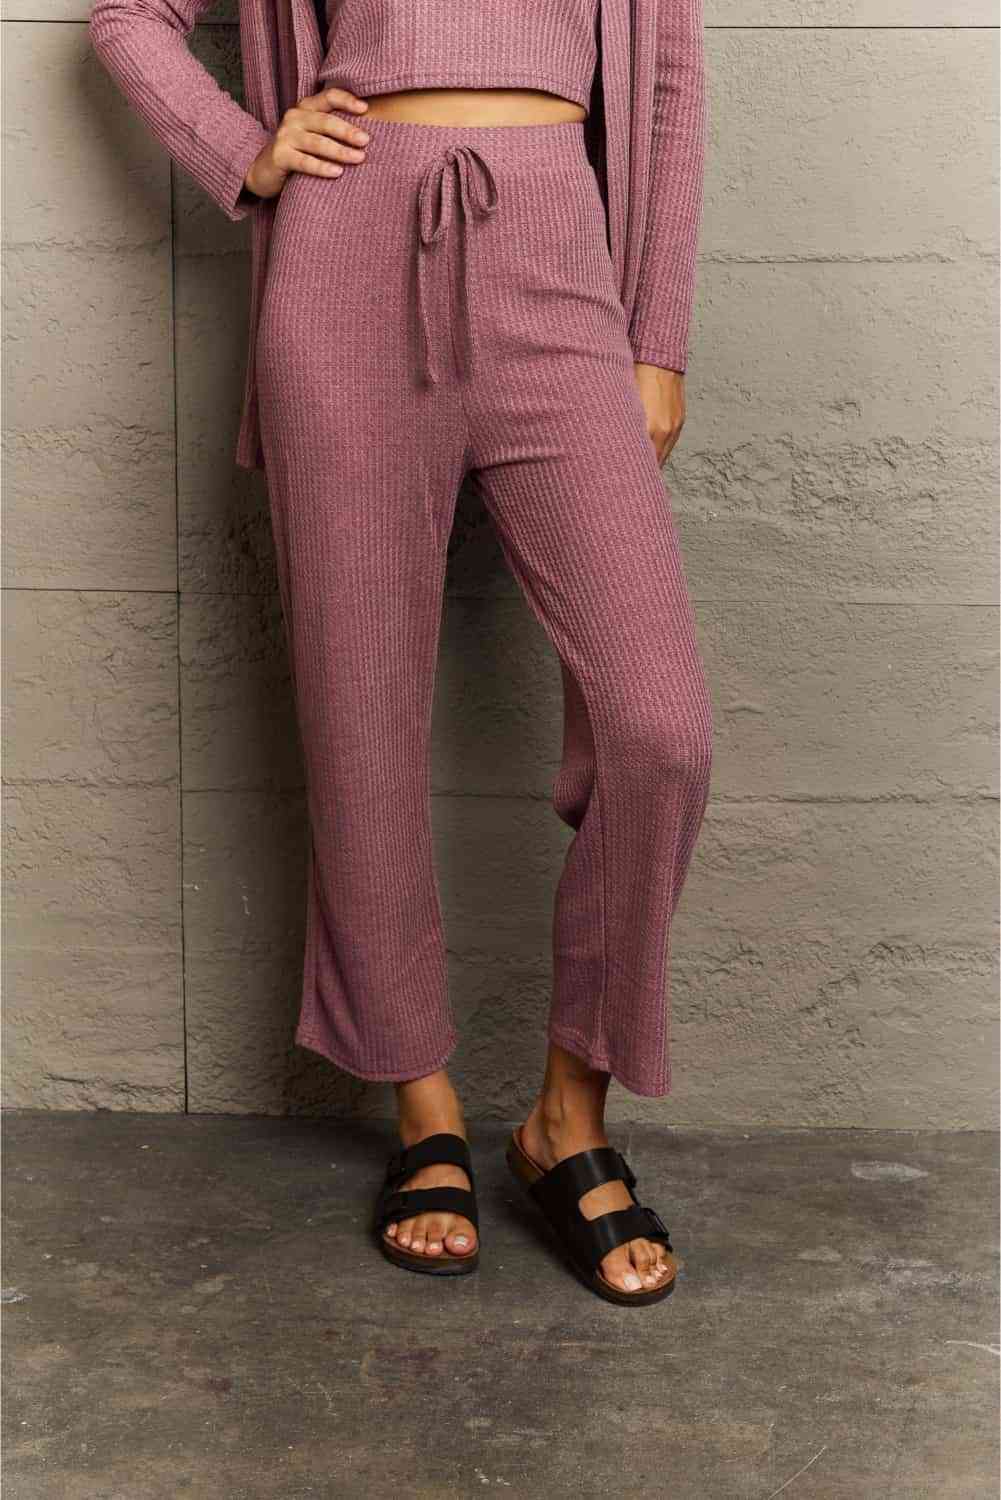 Closer view of pants from 3 piece lounge set in mauve